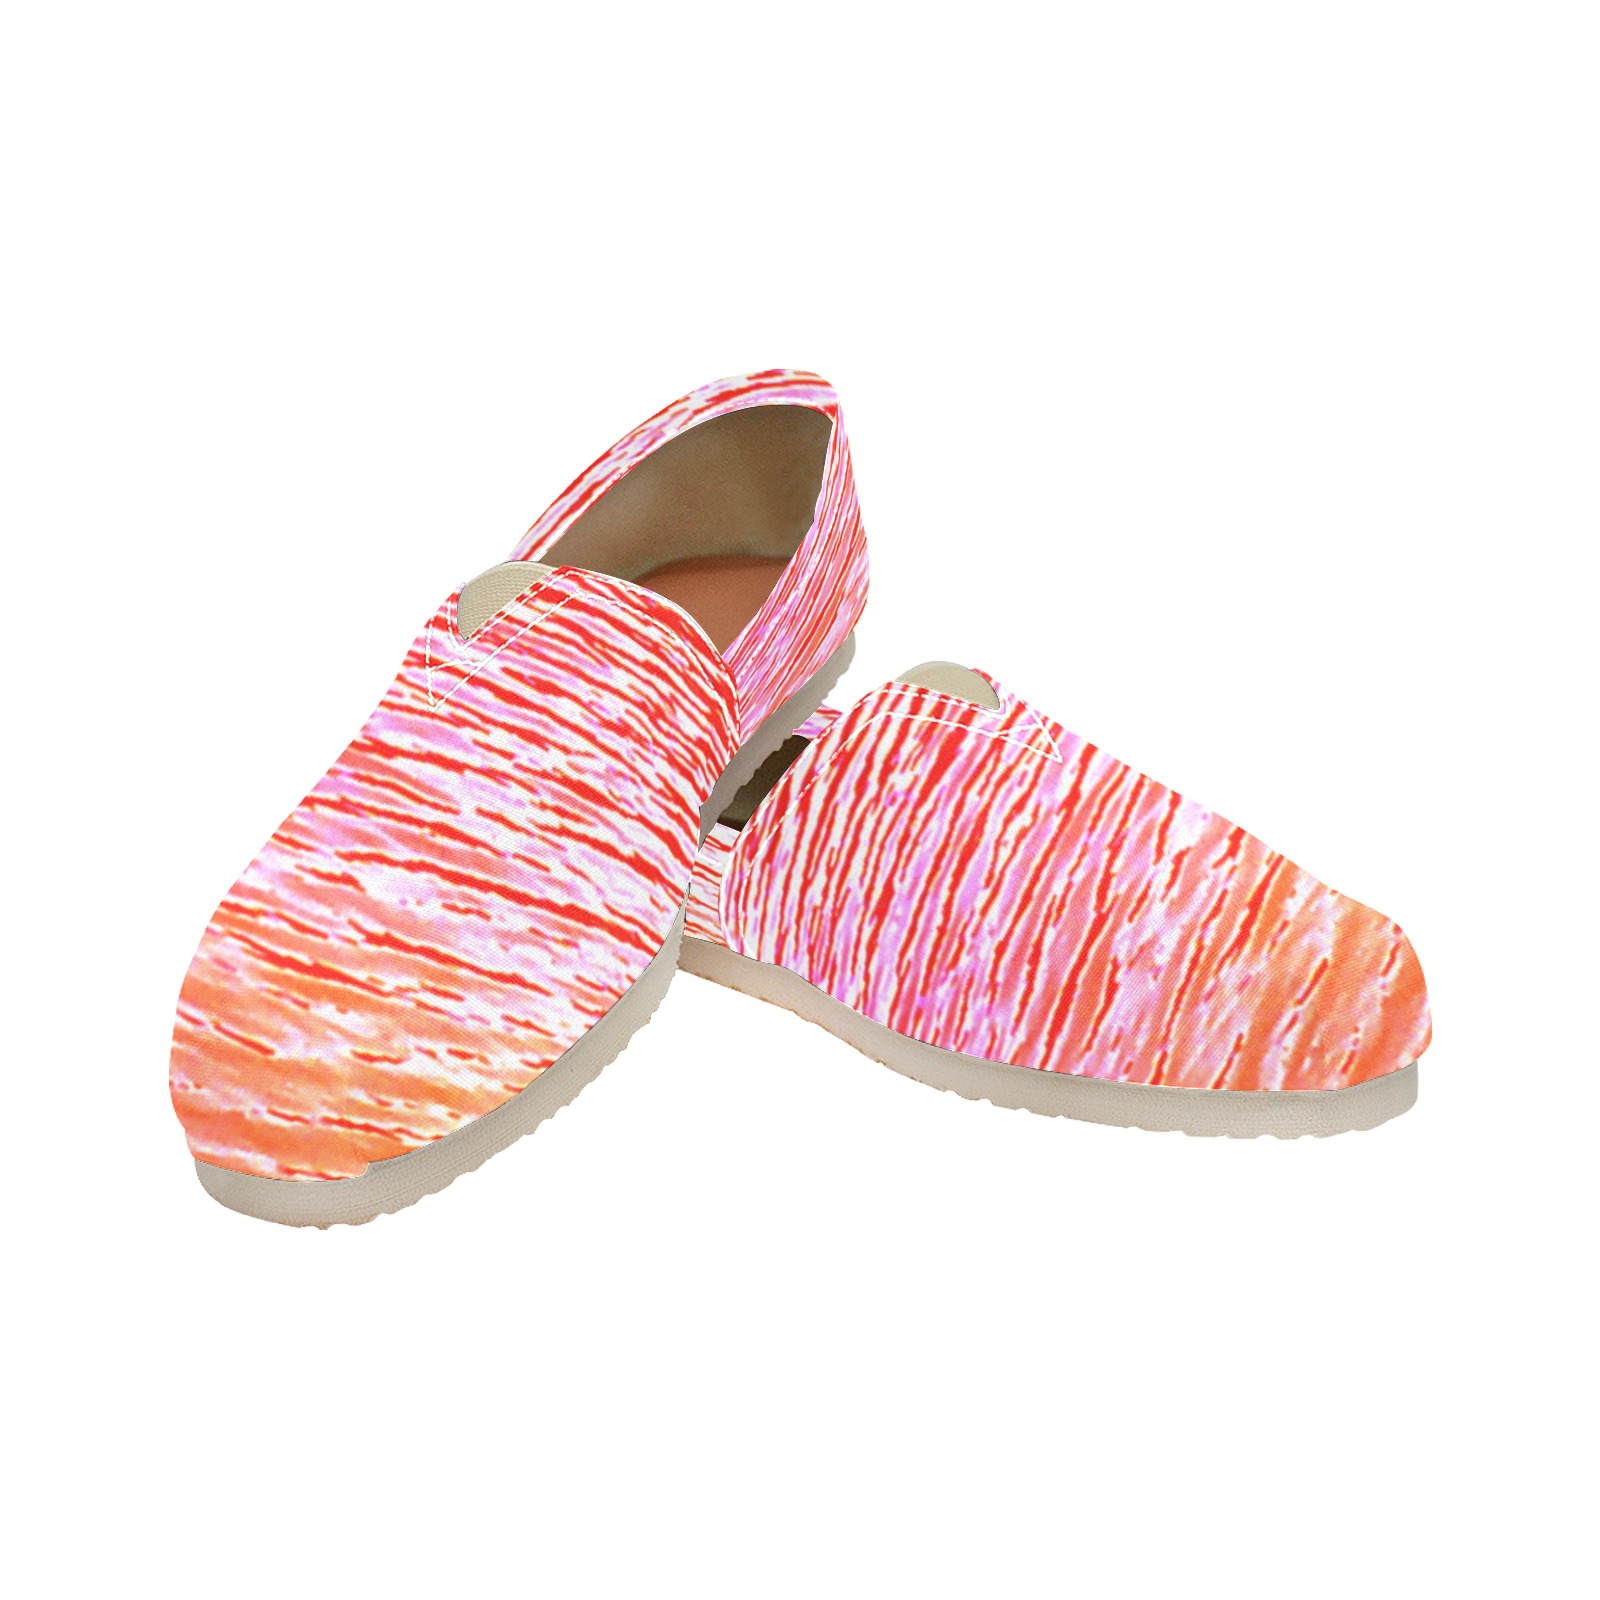 Orange and red water Women's Classic Canvas Slip-On (Model 1206)